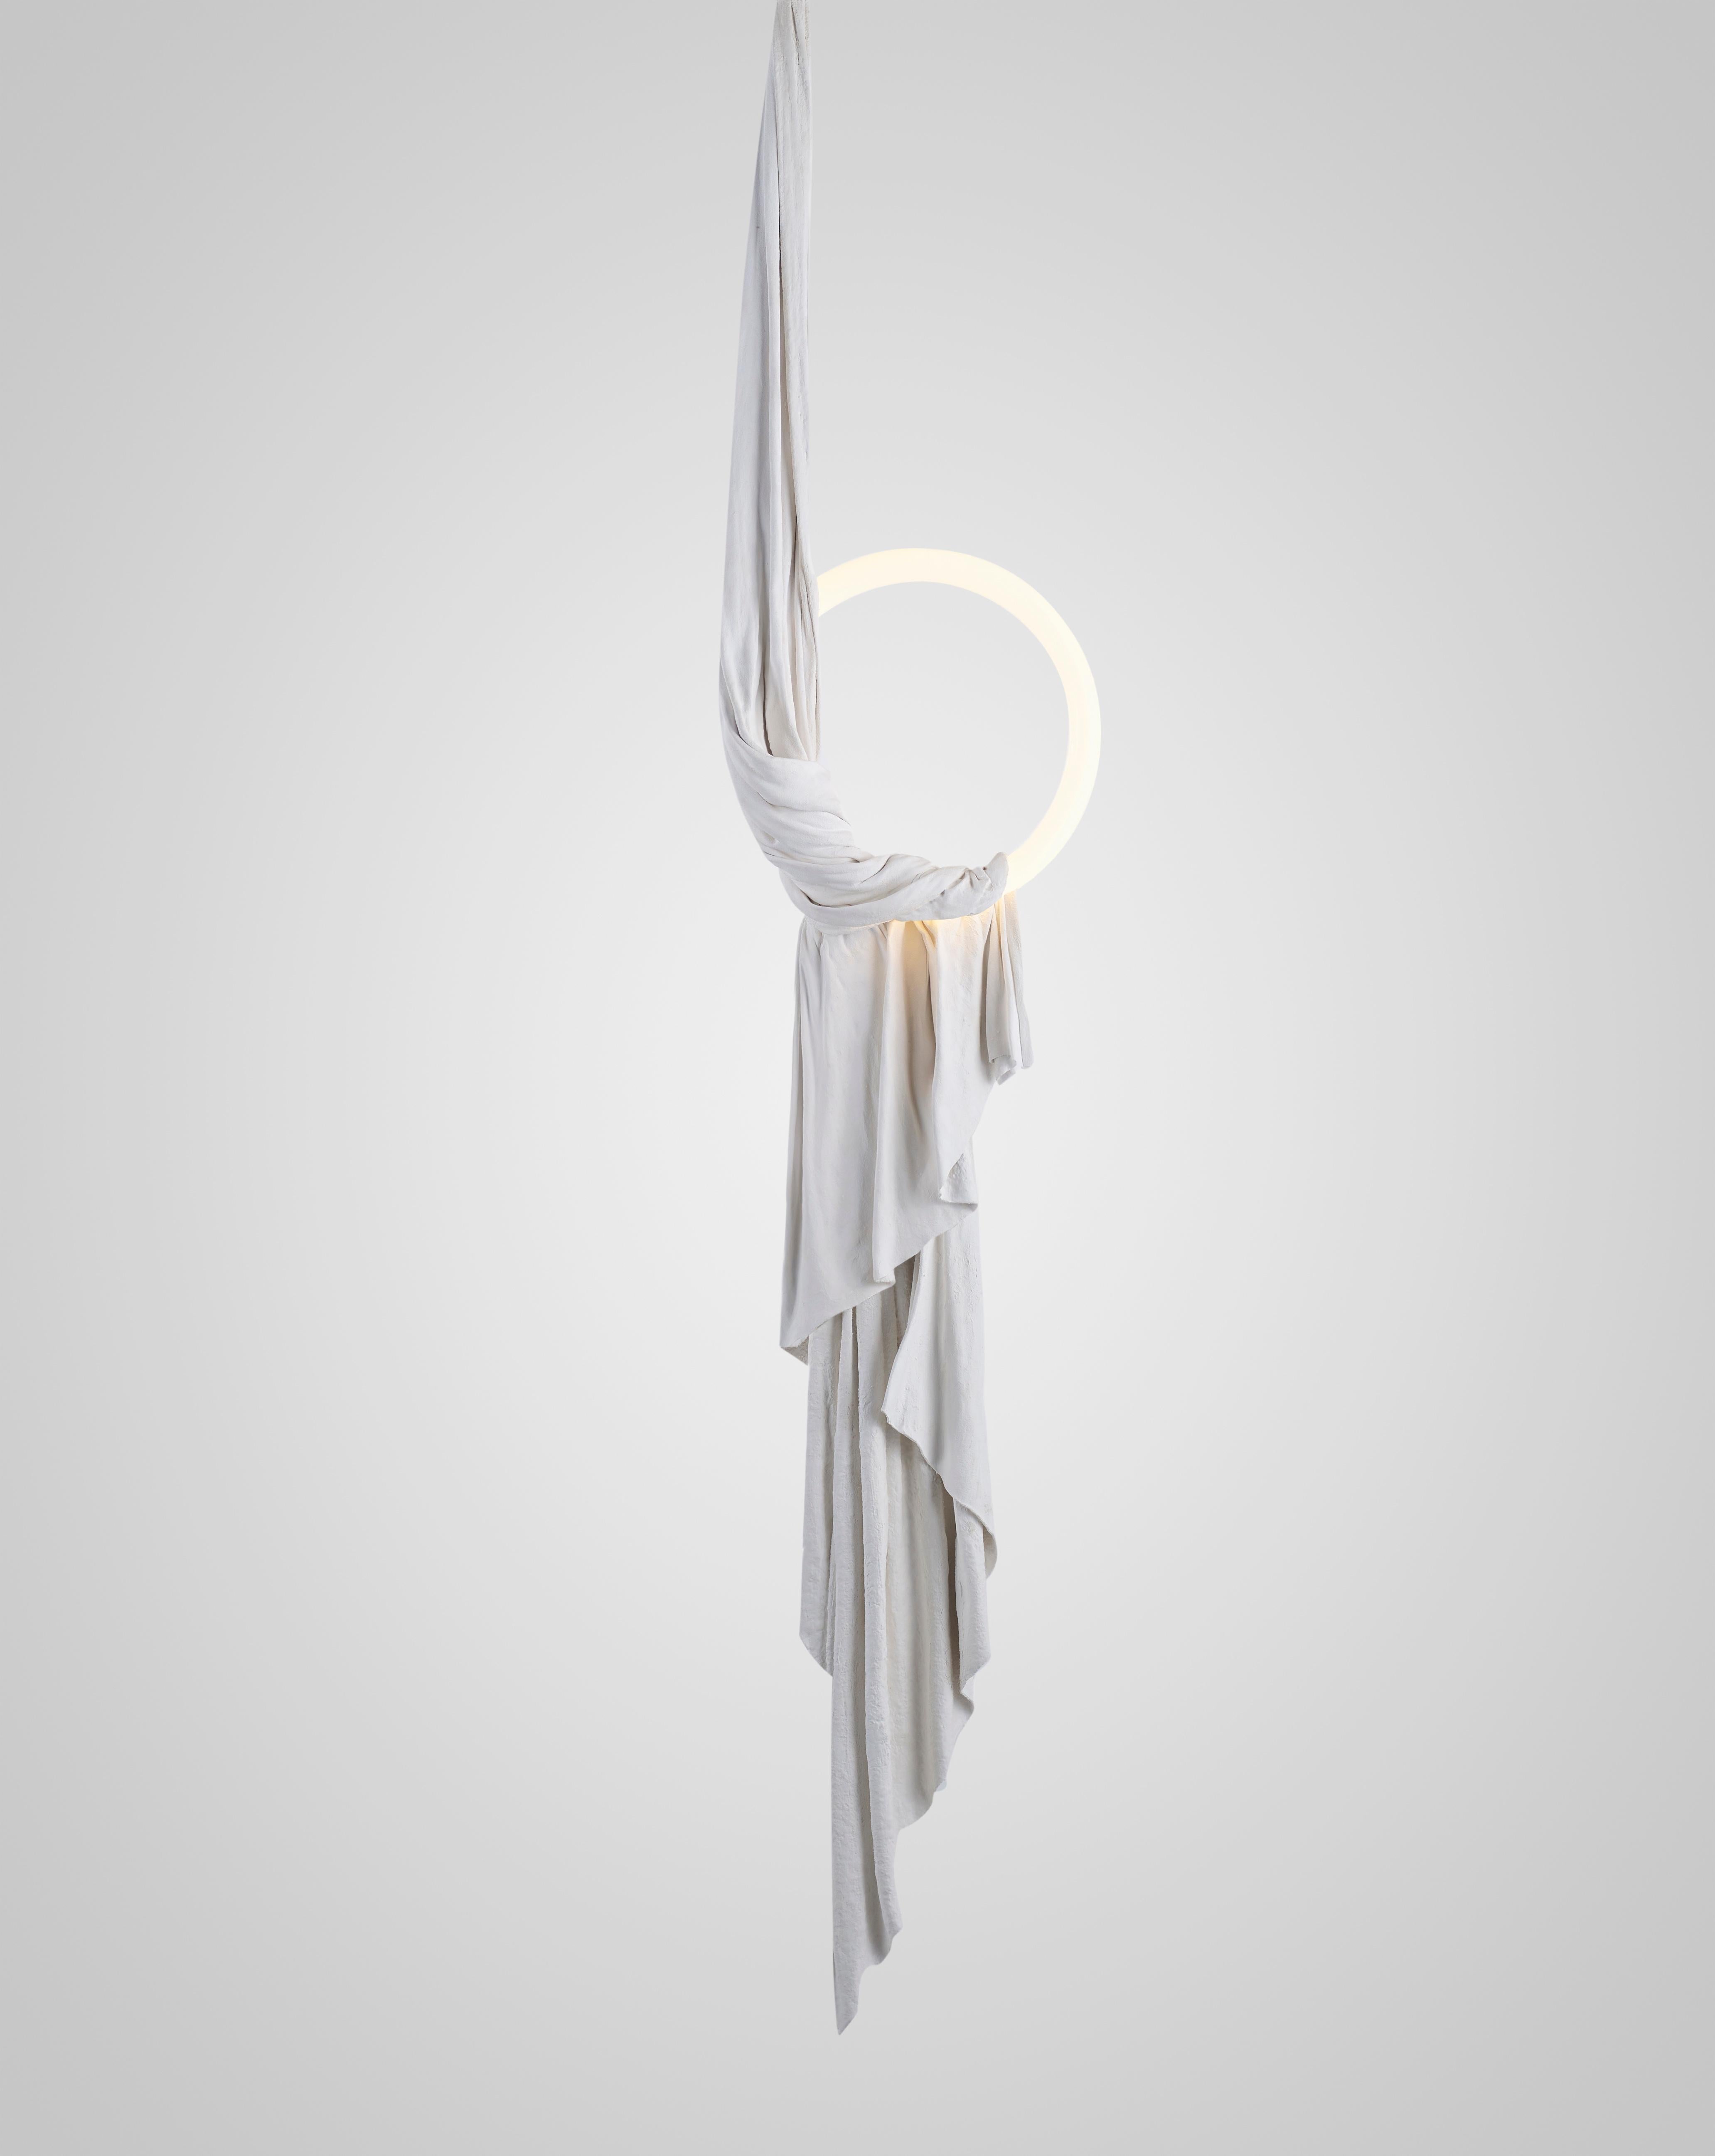 Lee Broom - REQUIEM RING In New Condition For Sale In New York, NY